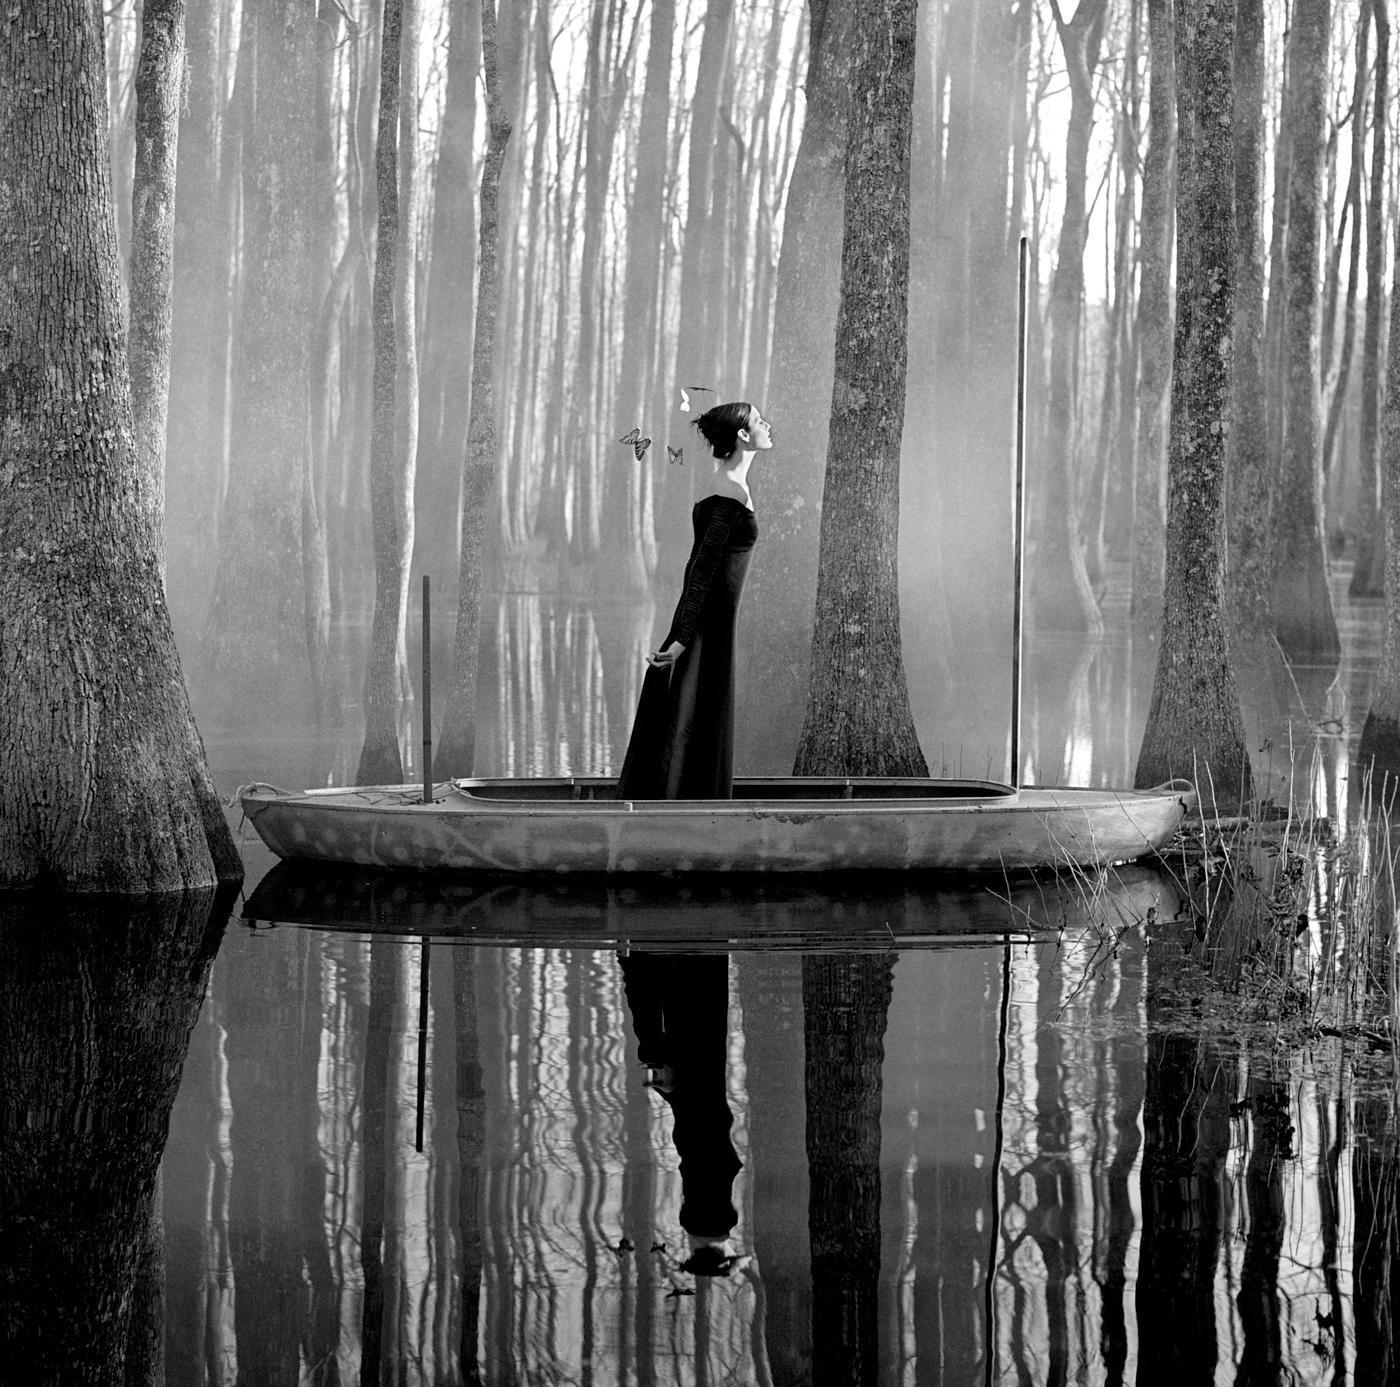 Rodney Smith Black and White Photograph - Danielle in Boat, Beaufort, South Carolina - 58 x 58 inches